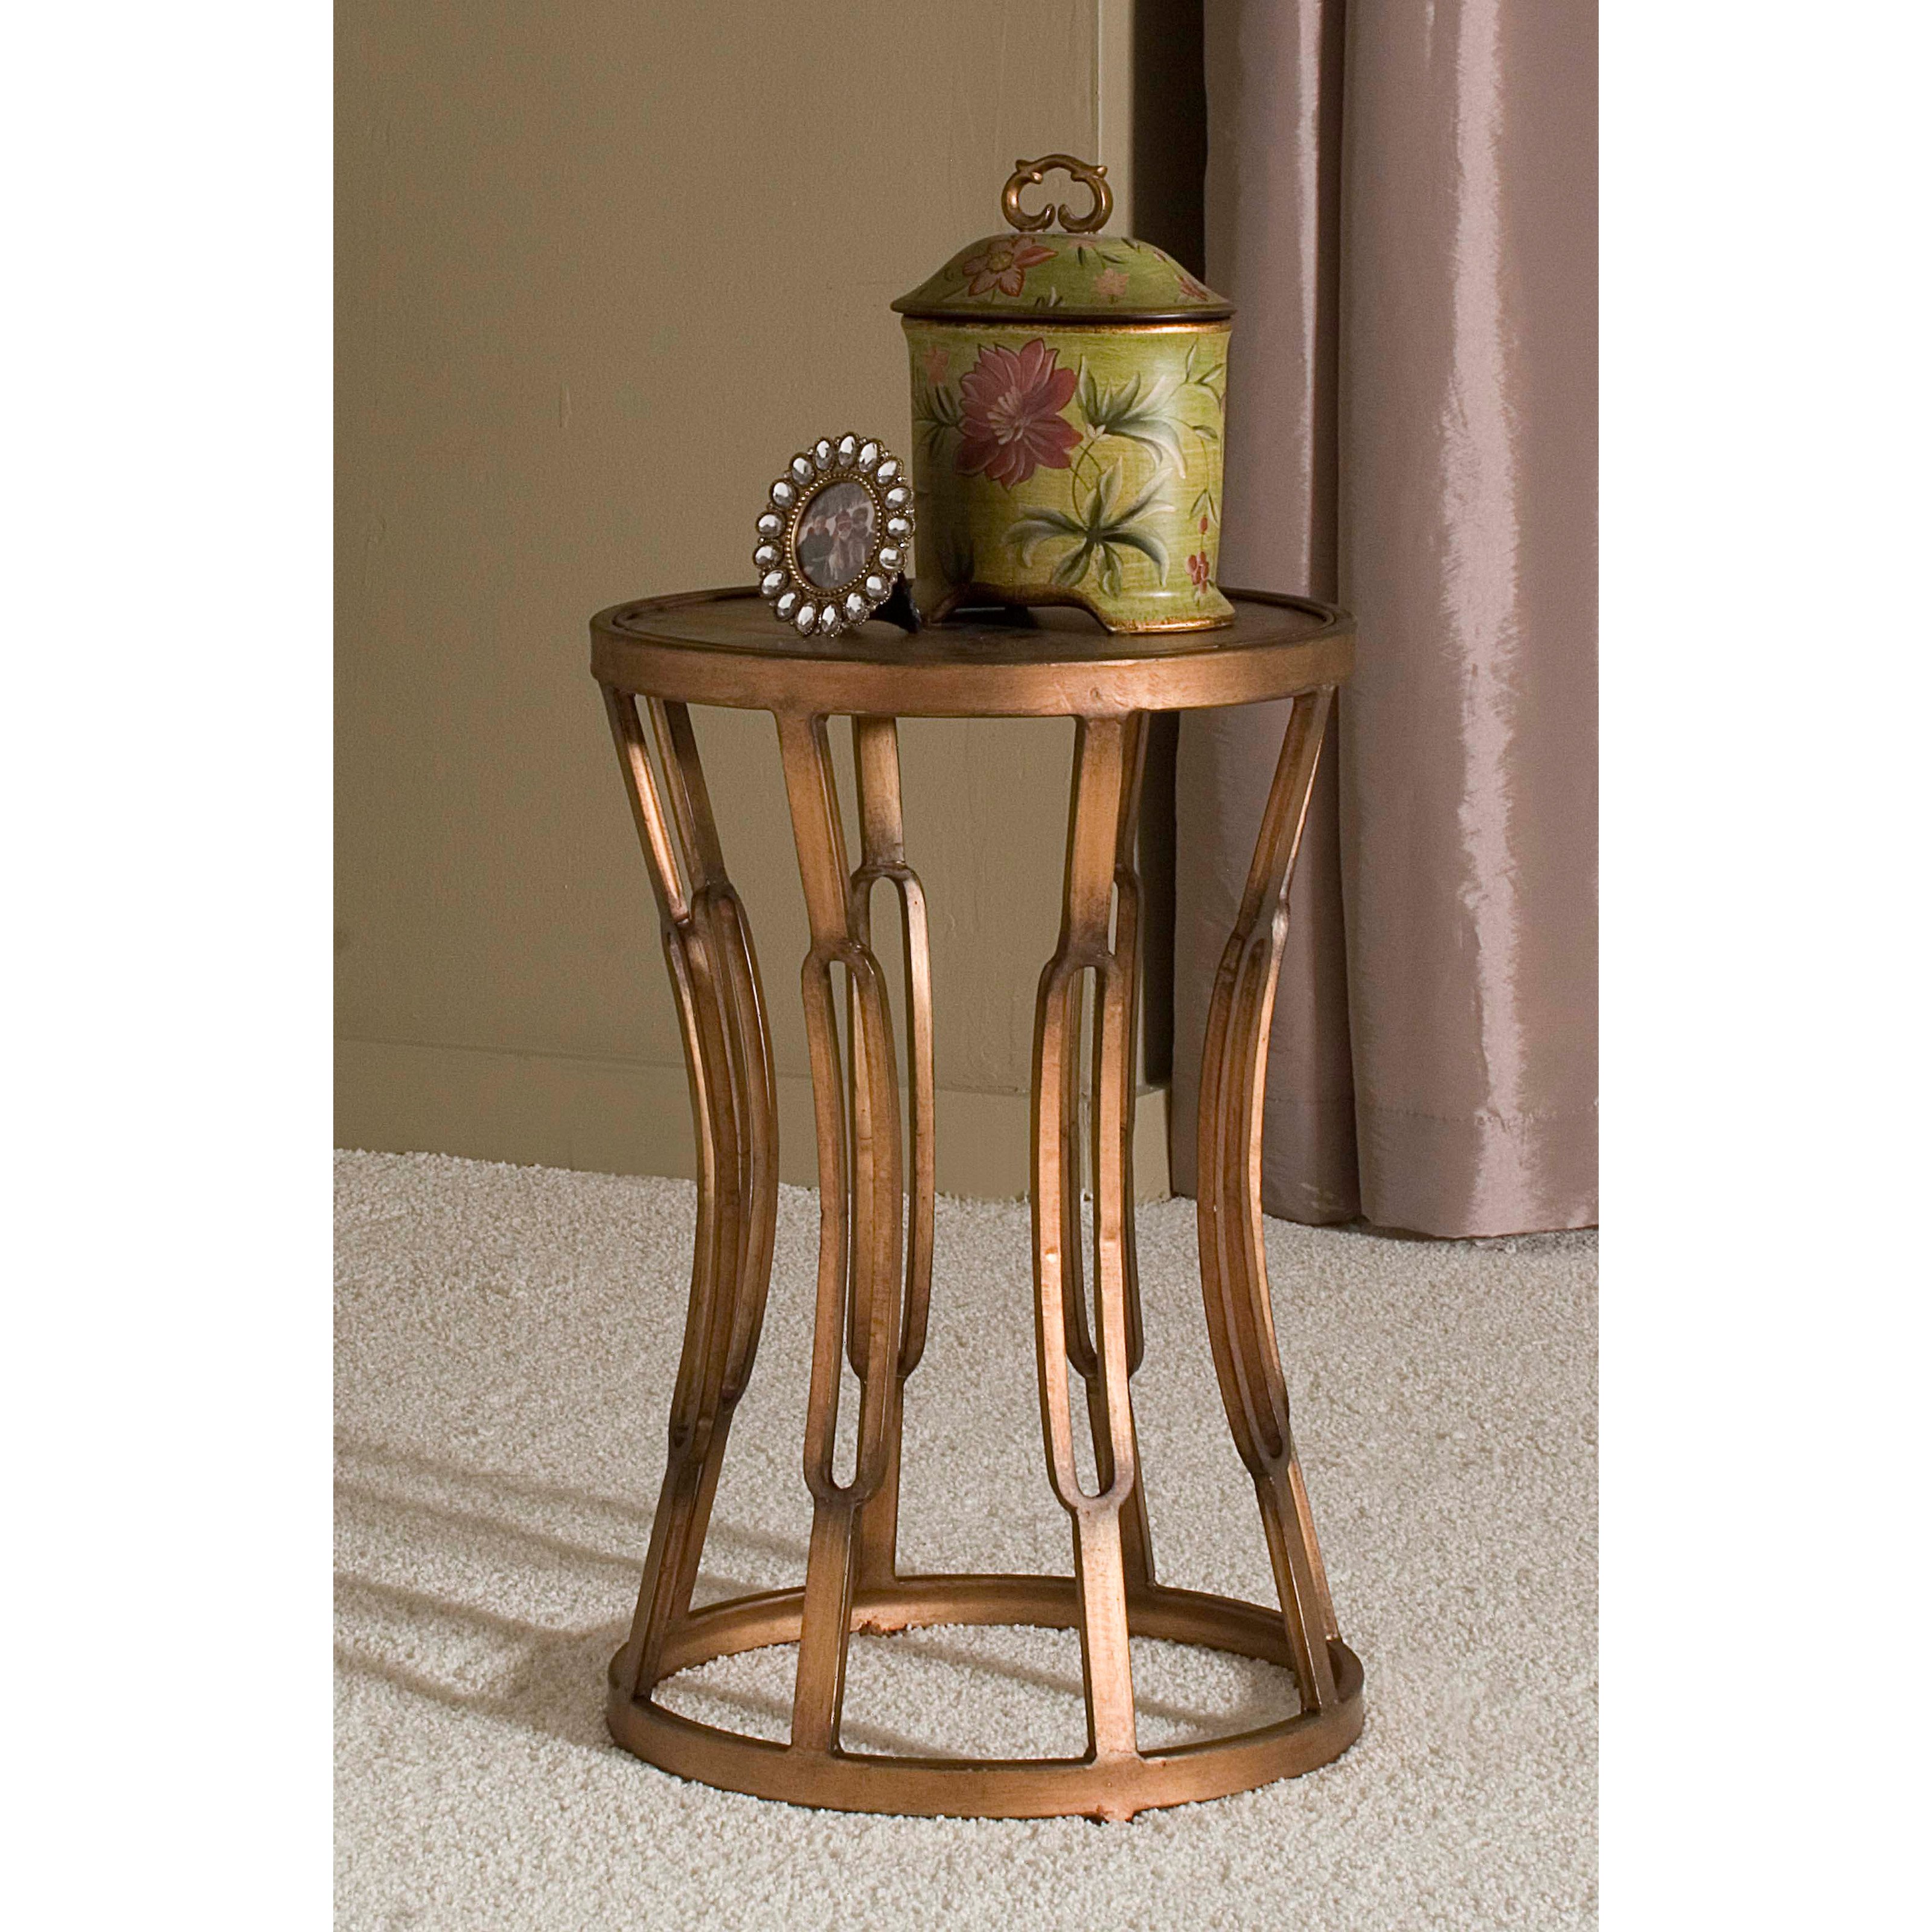 innerspace hourglass accent table antique copper end french round drum west elm throne seat top kitchen lamps leg feet art deco side resin patio furniture brass glass cocktail